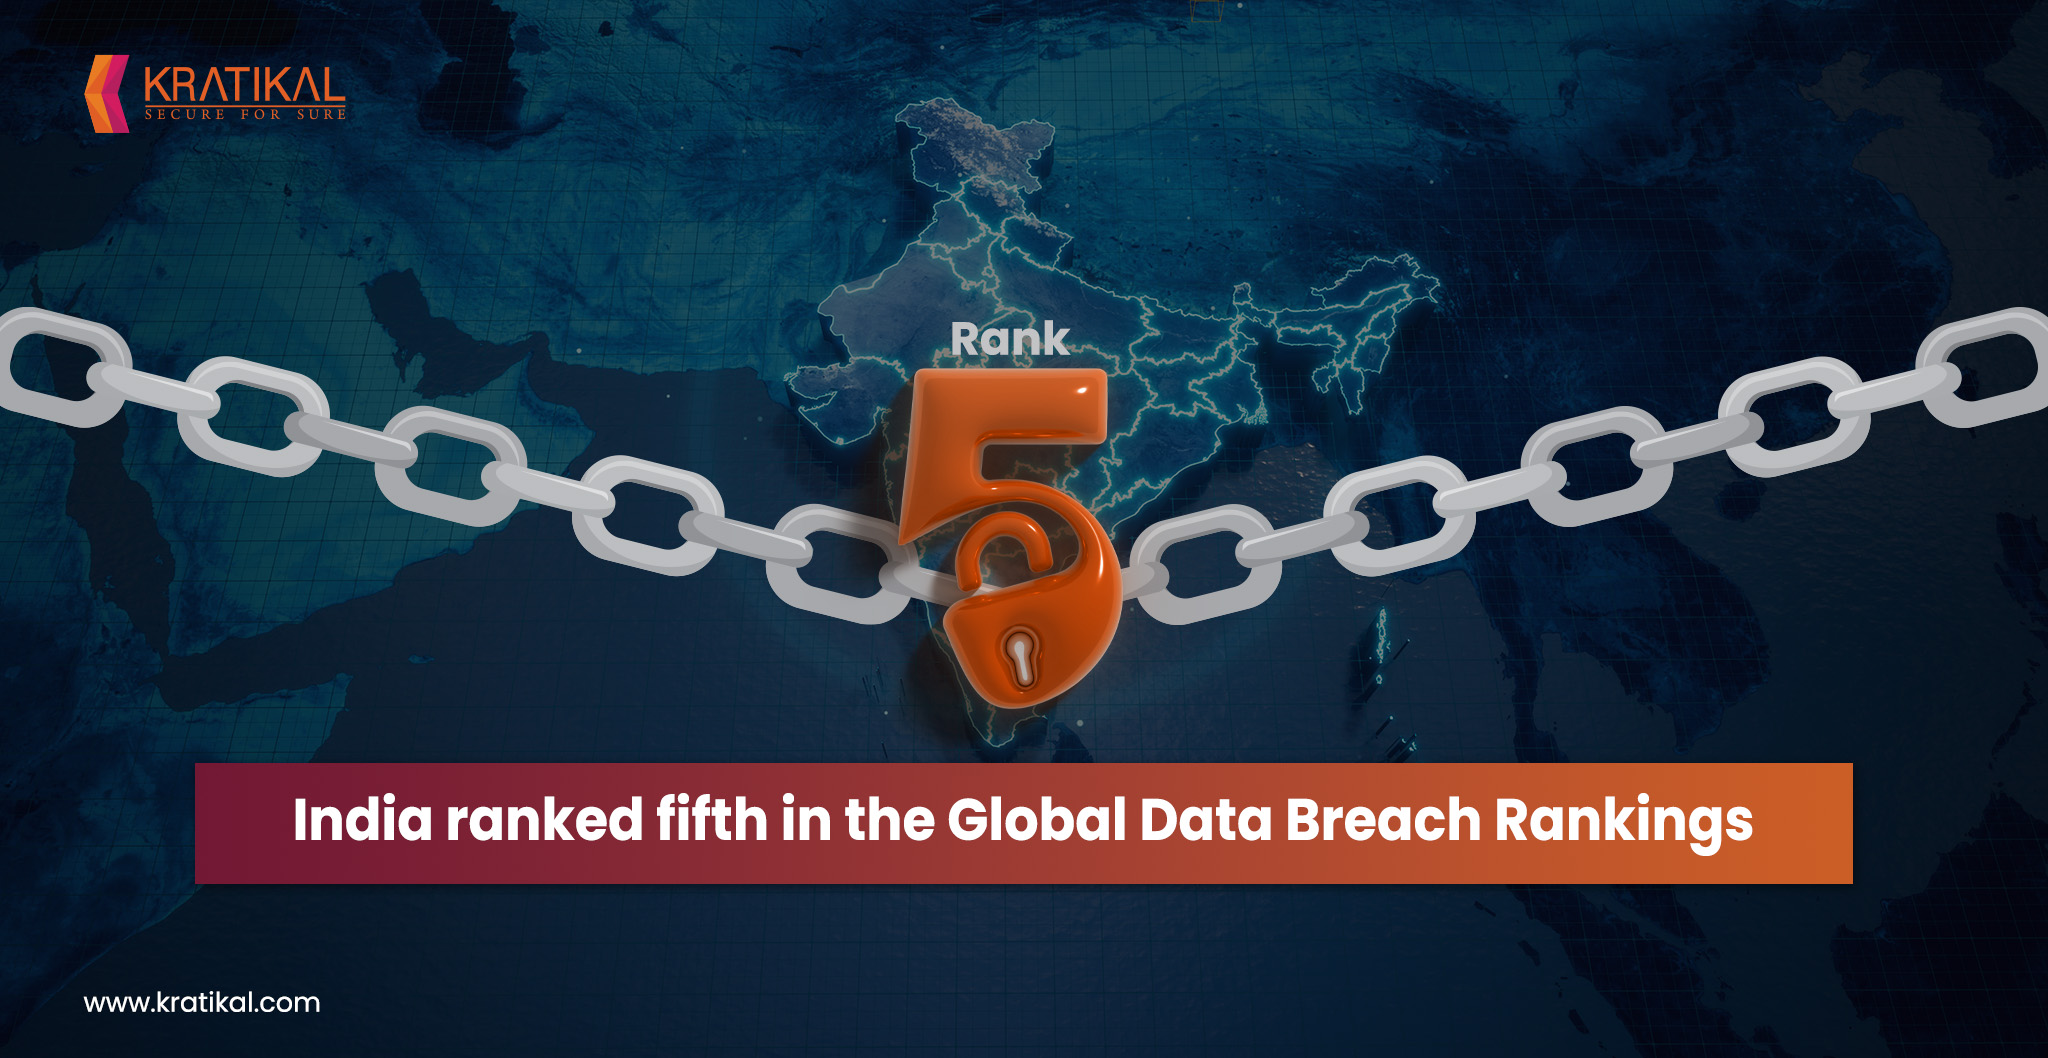 India Stood at 5th position, in the Global Data Breach Rankings